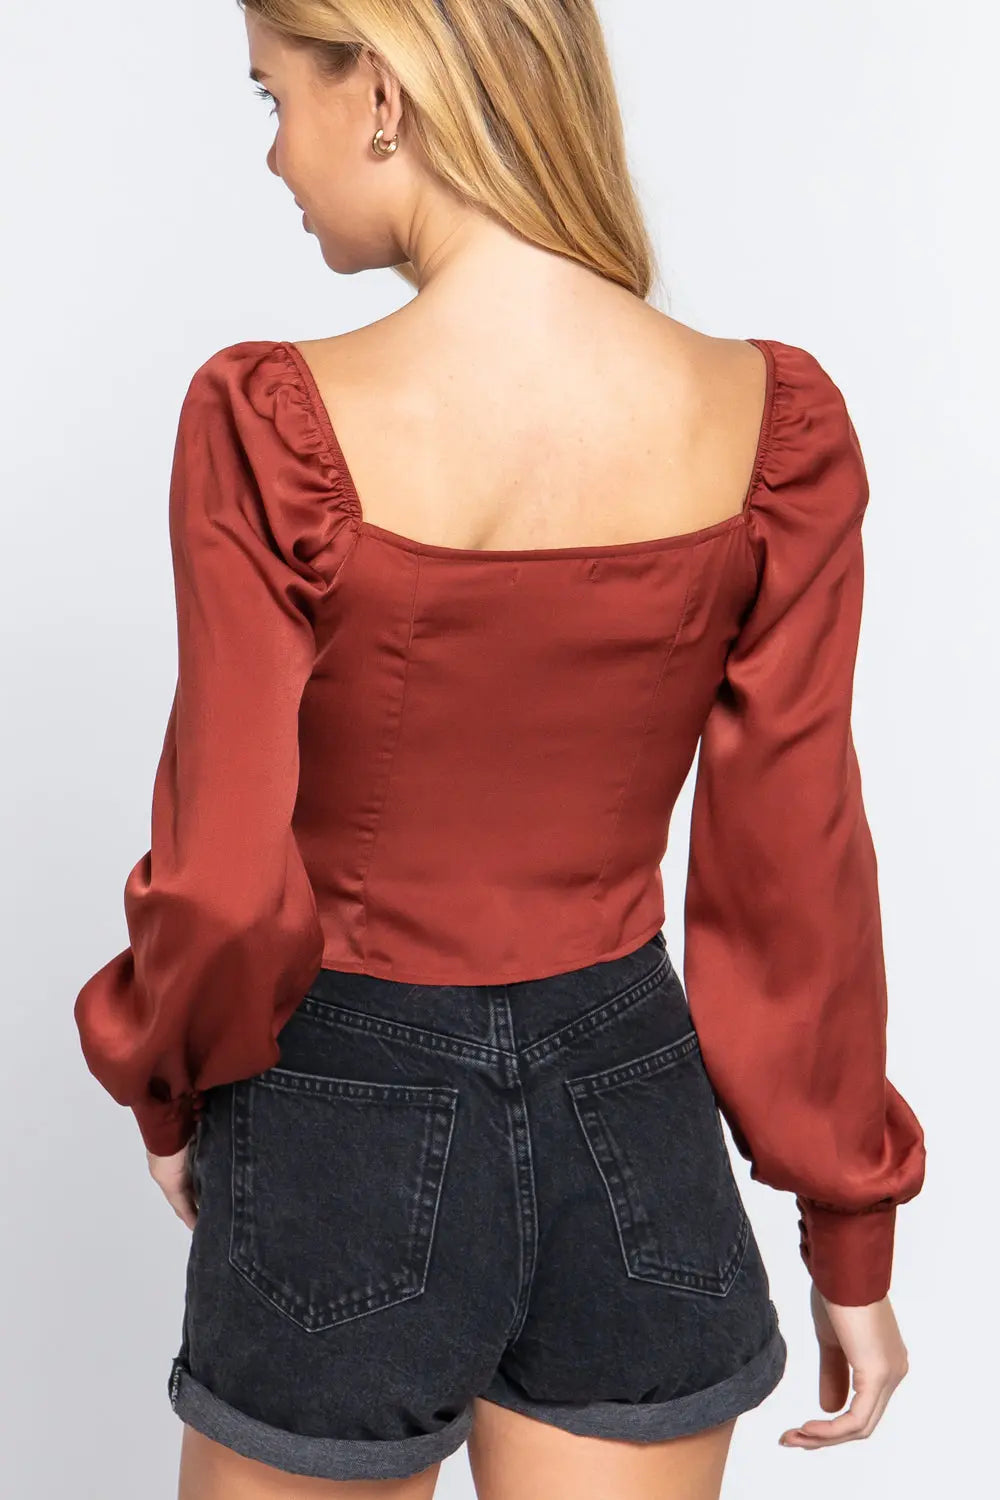 Long Sleeve Sweetheart Neck Front Ribbon Tie Detail Woven Top Sunny EvE Fashion